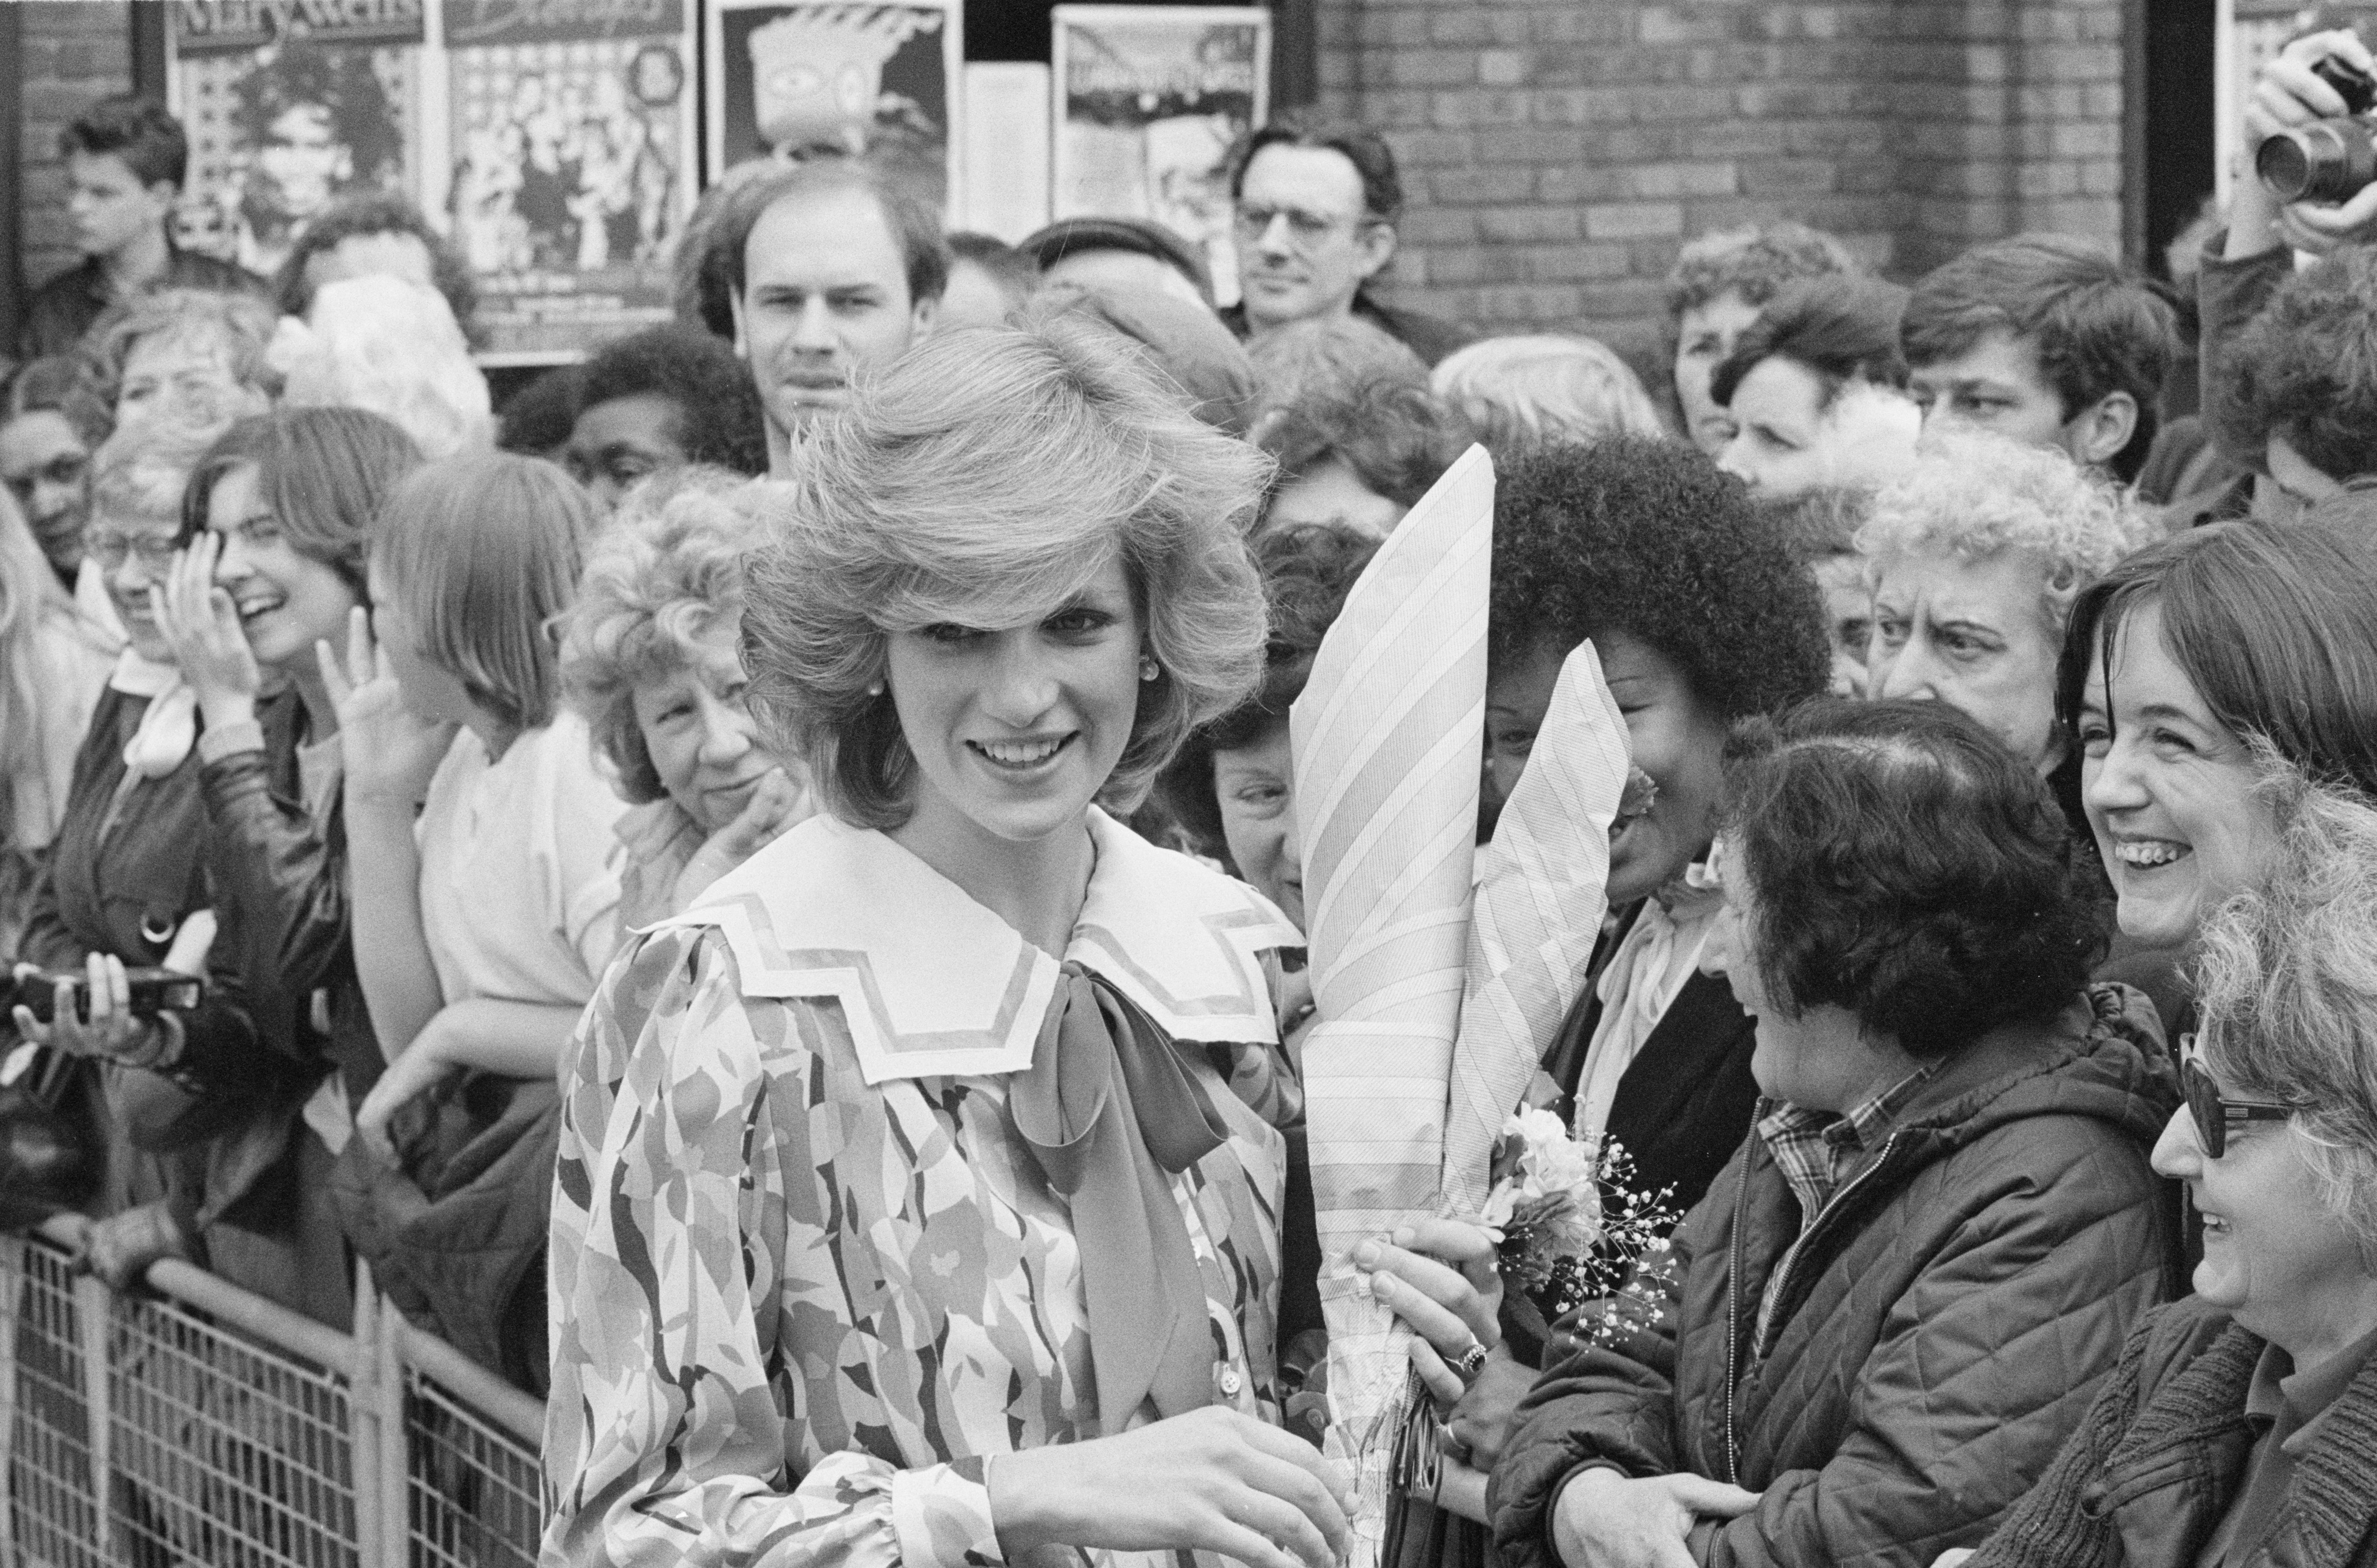 Princess Diana visits an arts centre in south east London in 1984 while pregnant with Harry